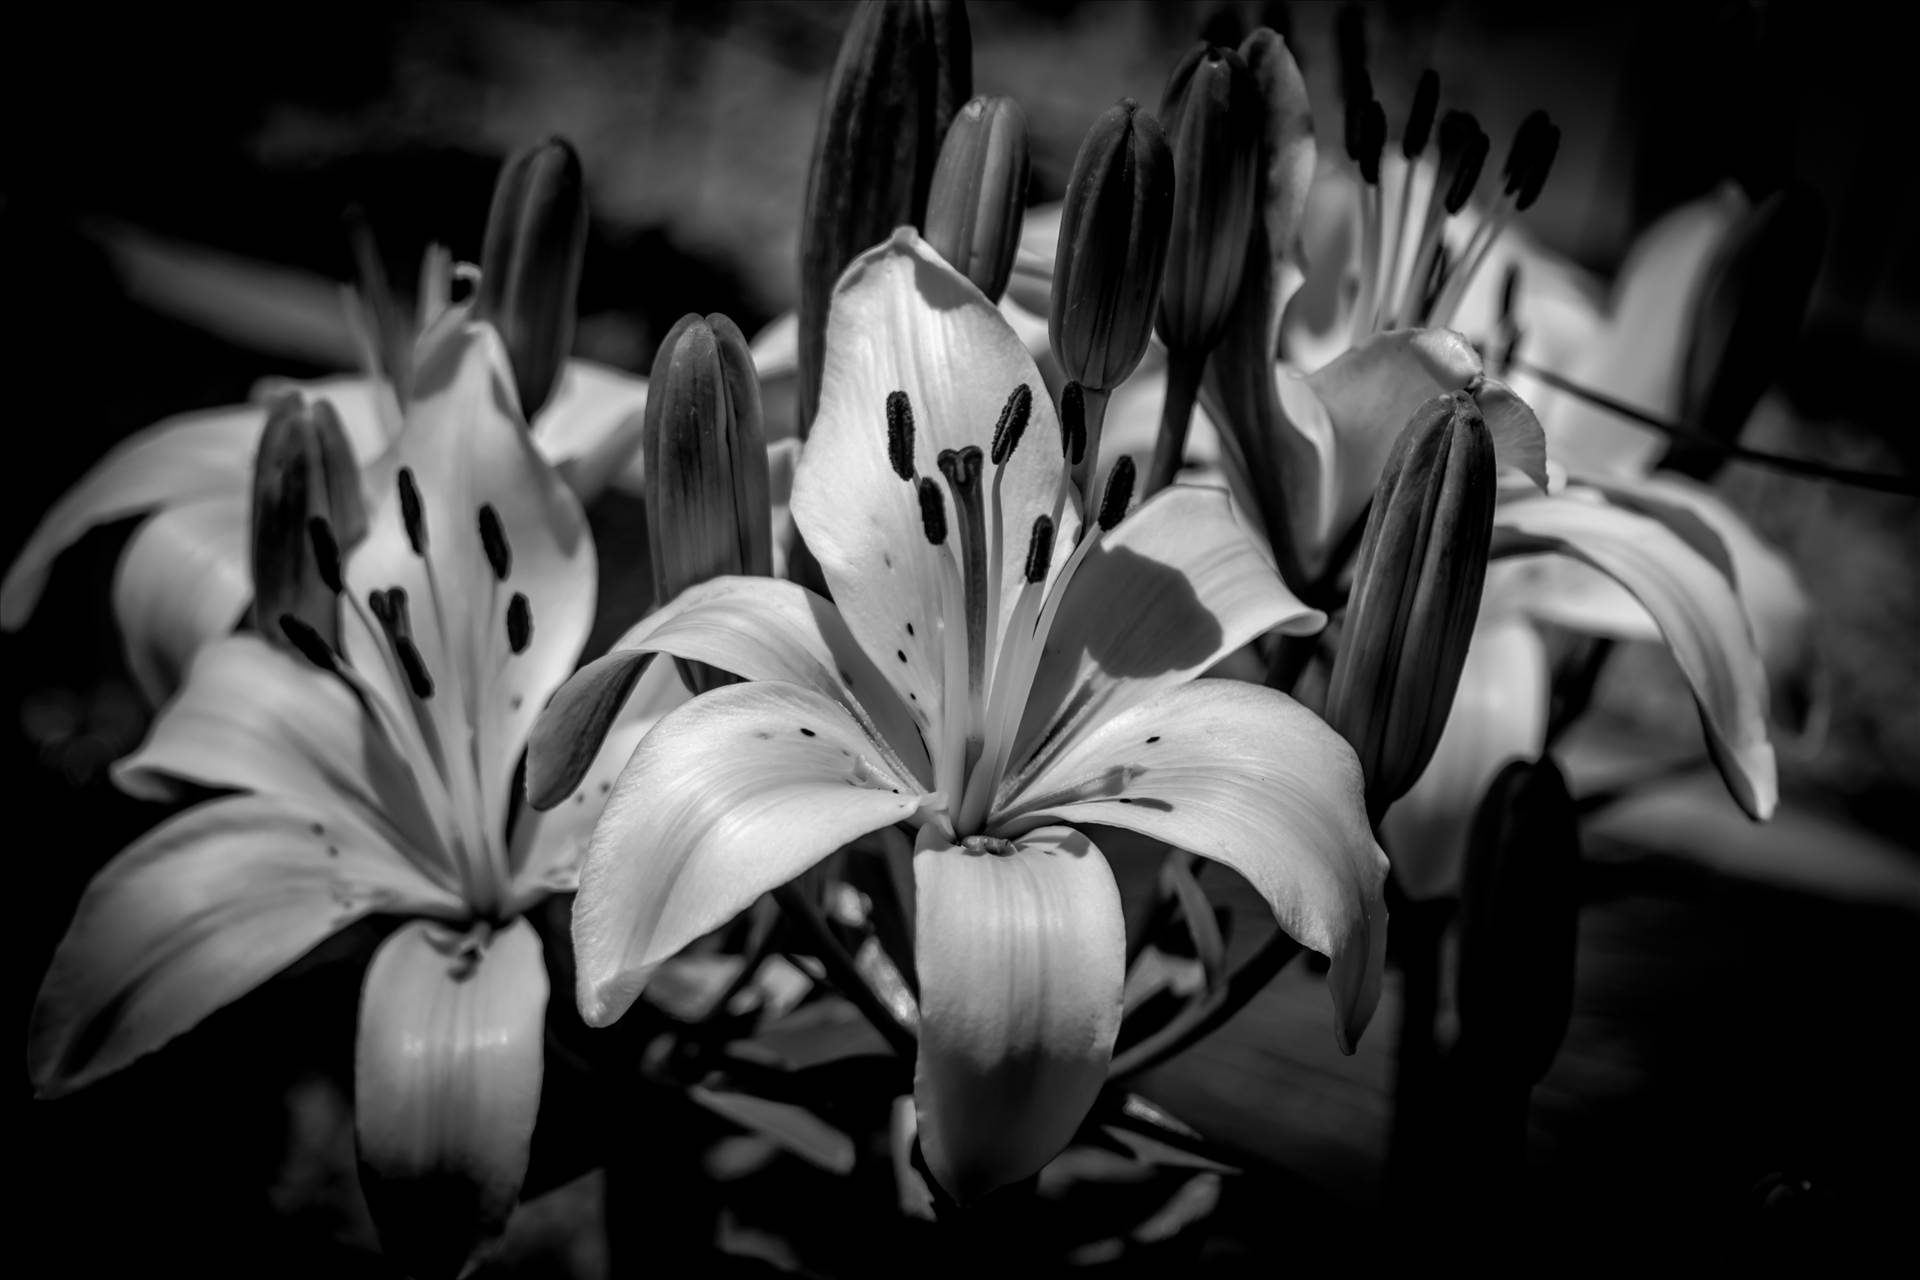 B\x26W Lilies from the Garden.jpg - Lilies in the Garden - Black and White by Dennis Rose